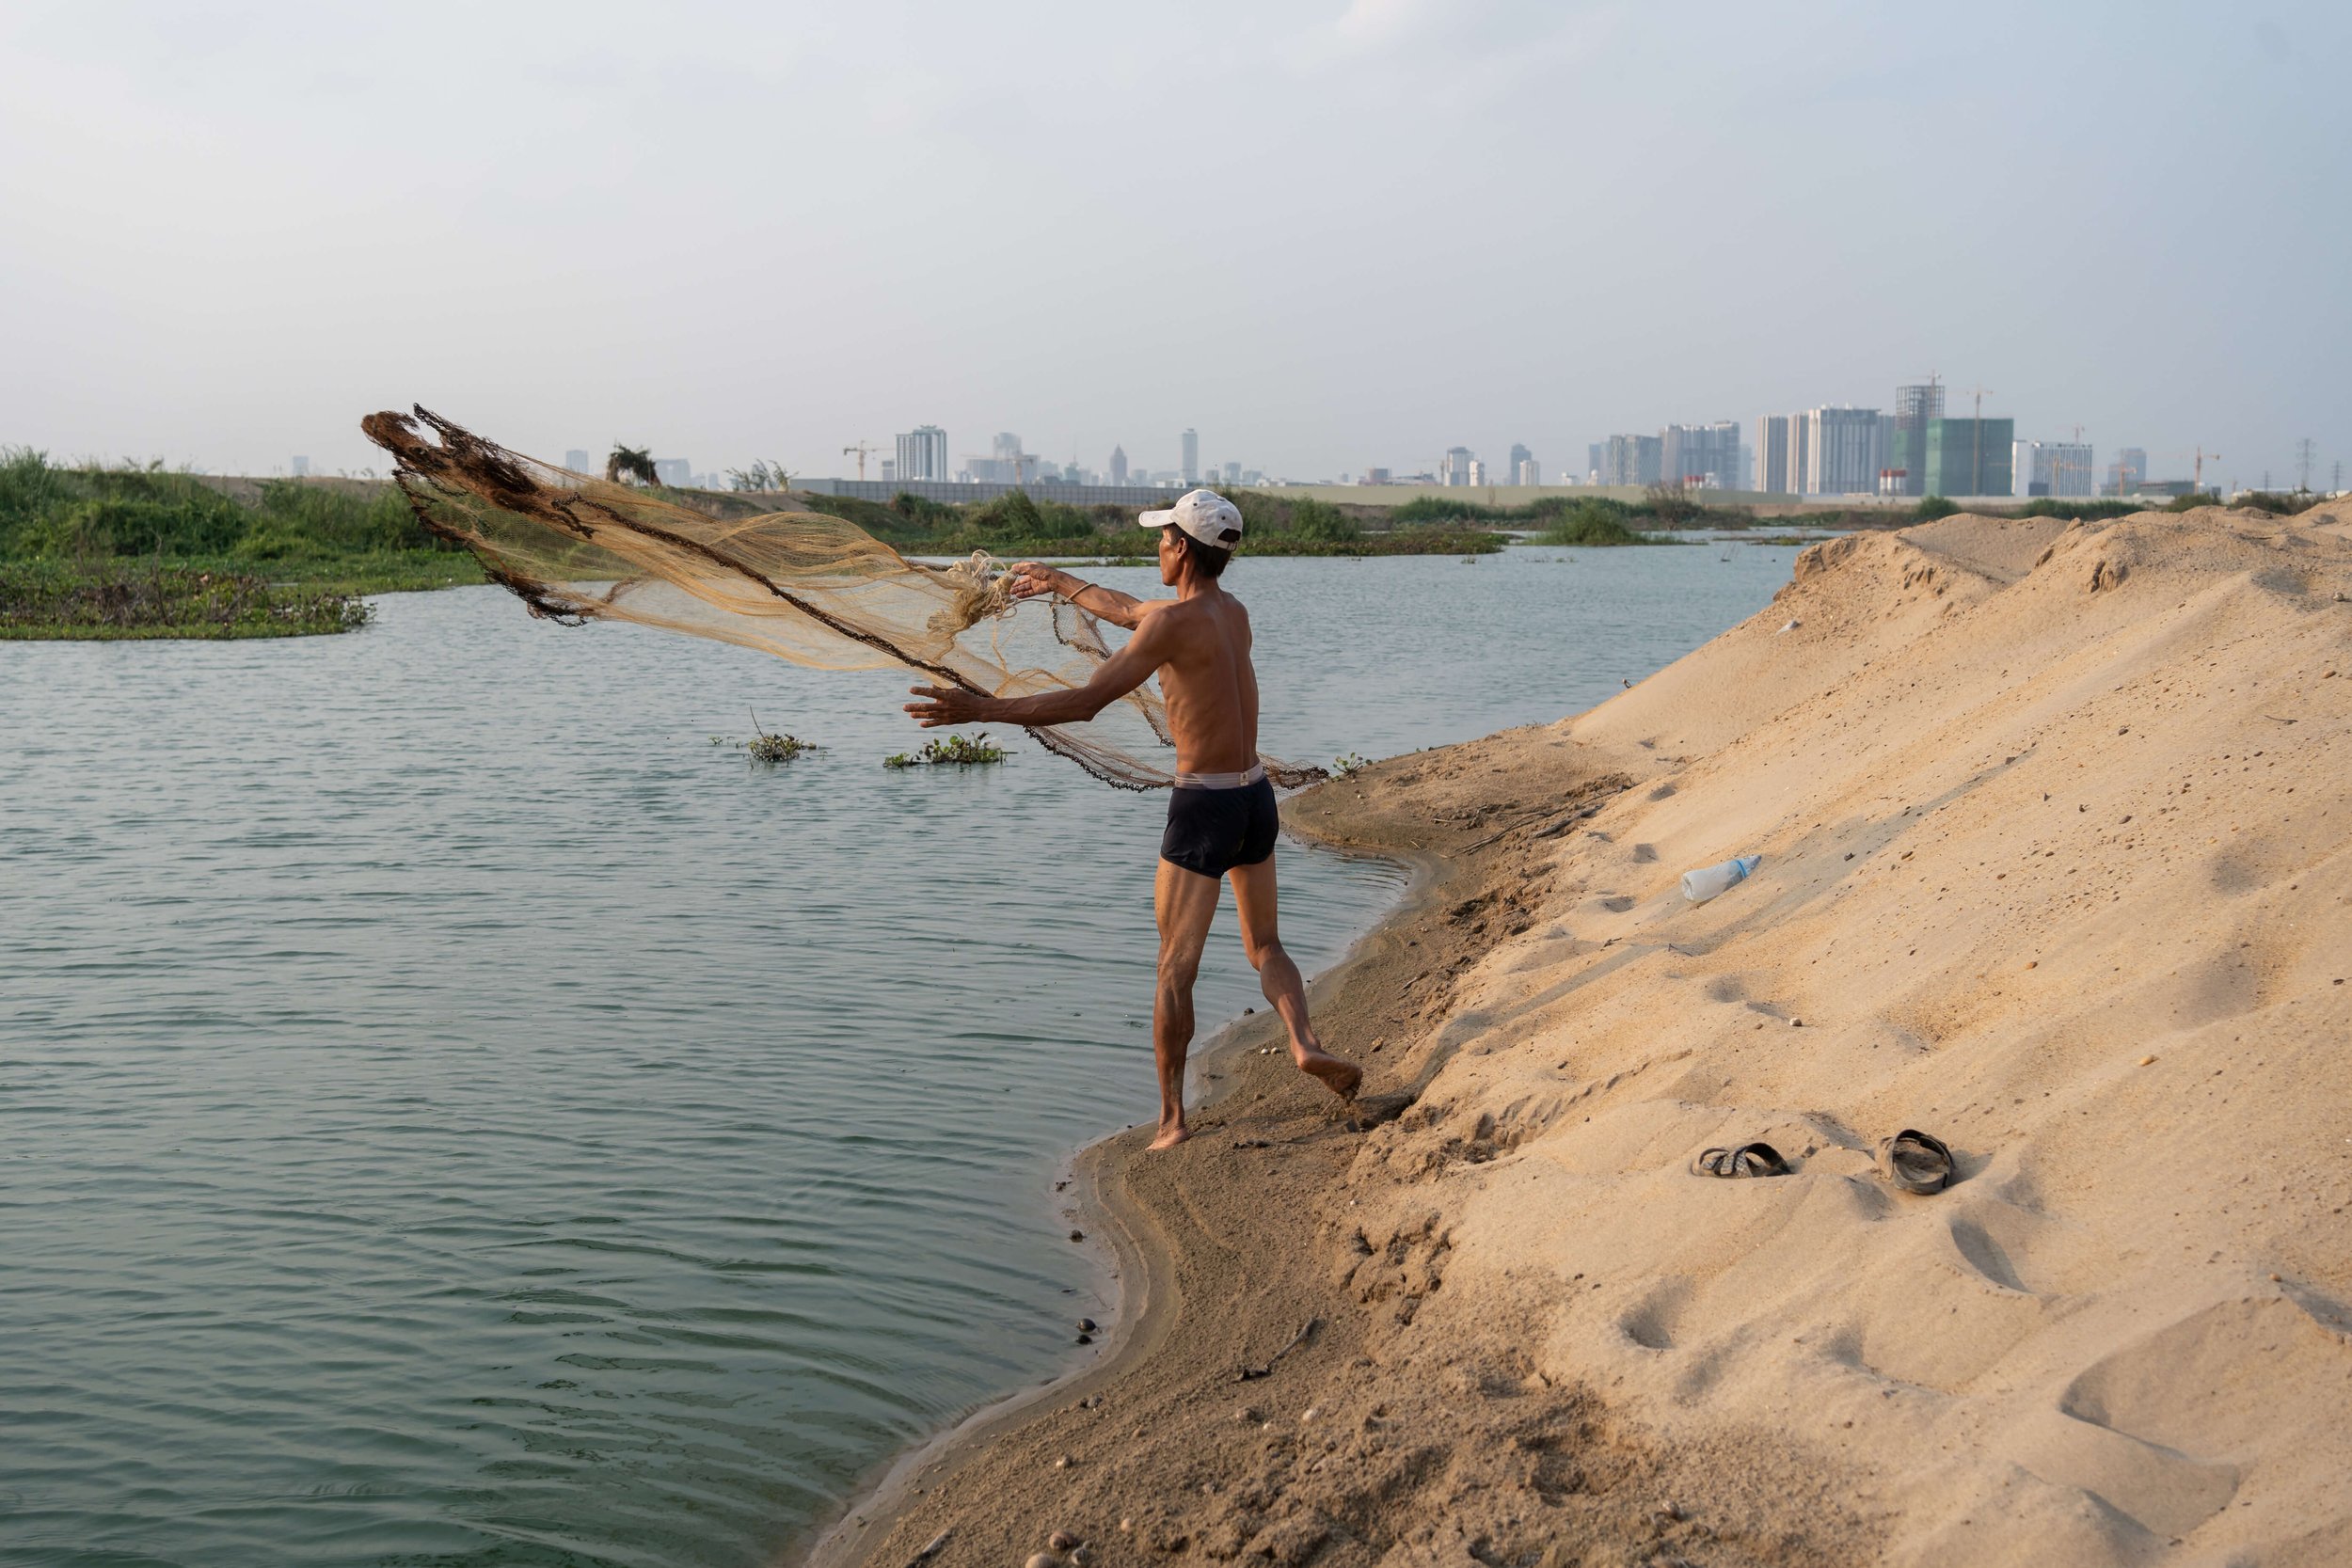  Tayang Sam, a construction worker from Cambodia’s remote Ratanakiri Province, casts his net on sand pumped from the Mekong into the wetlands. Sam has spent the last four years as a bricklayer, constructing a house owned by a member of the wealthy Ca